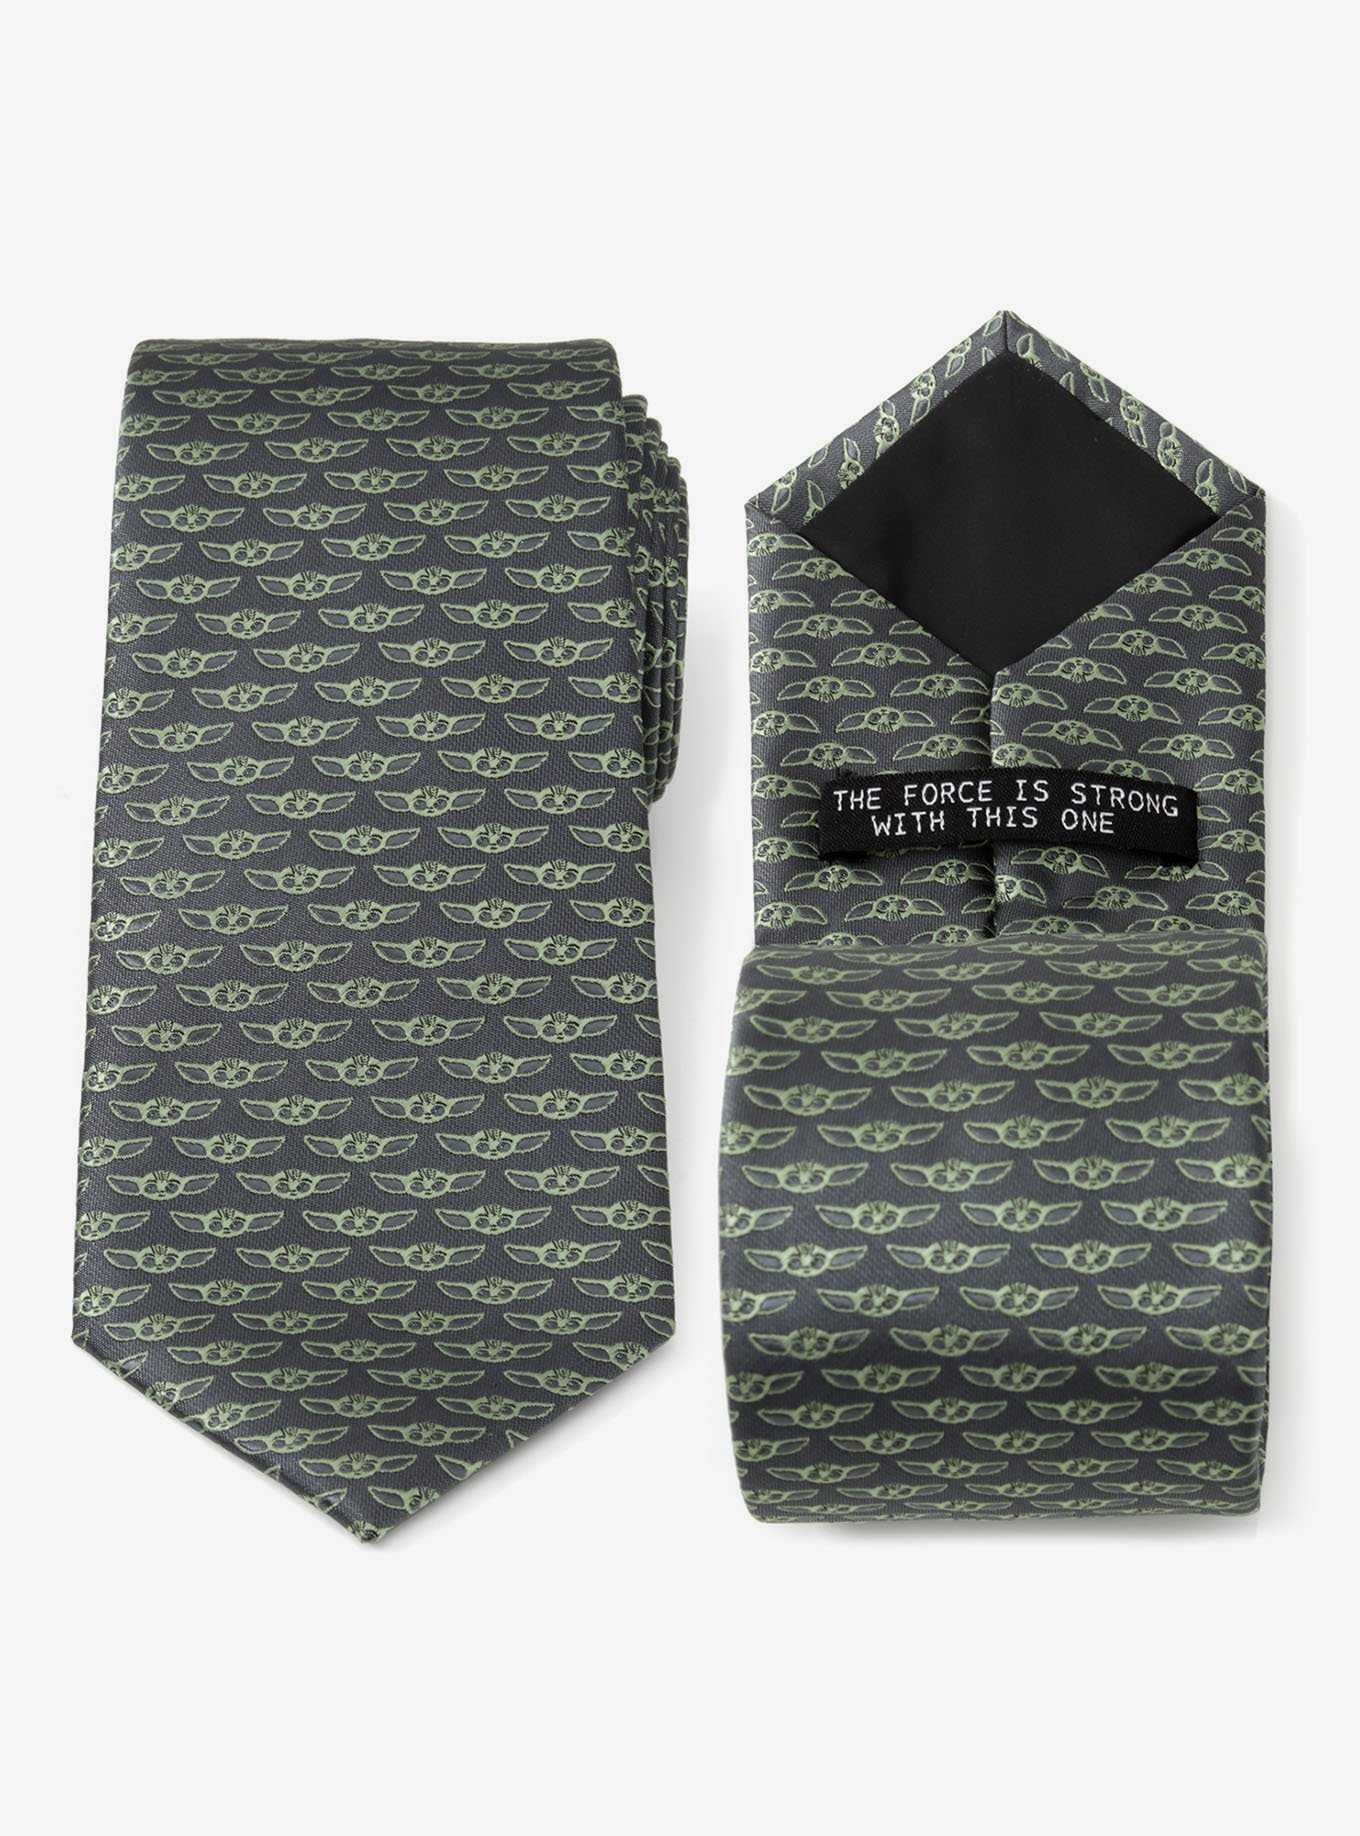 Star Wars The Mandalorian The Child "The Force is Strong With This One" Men's Tie, , hi-res